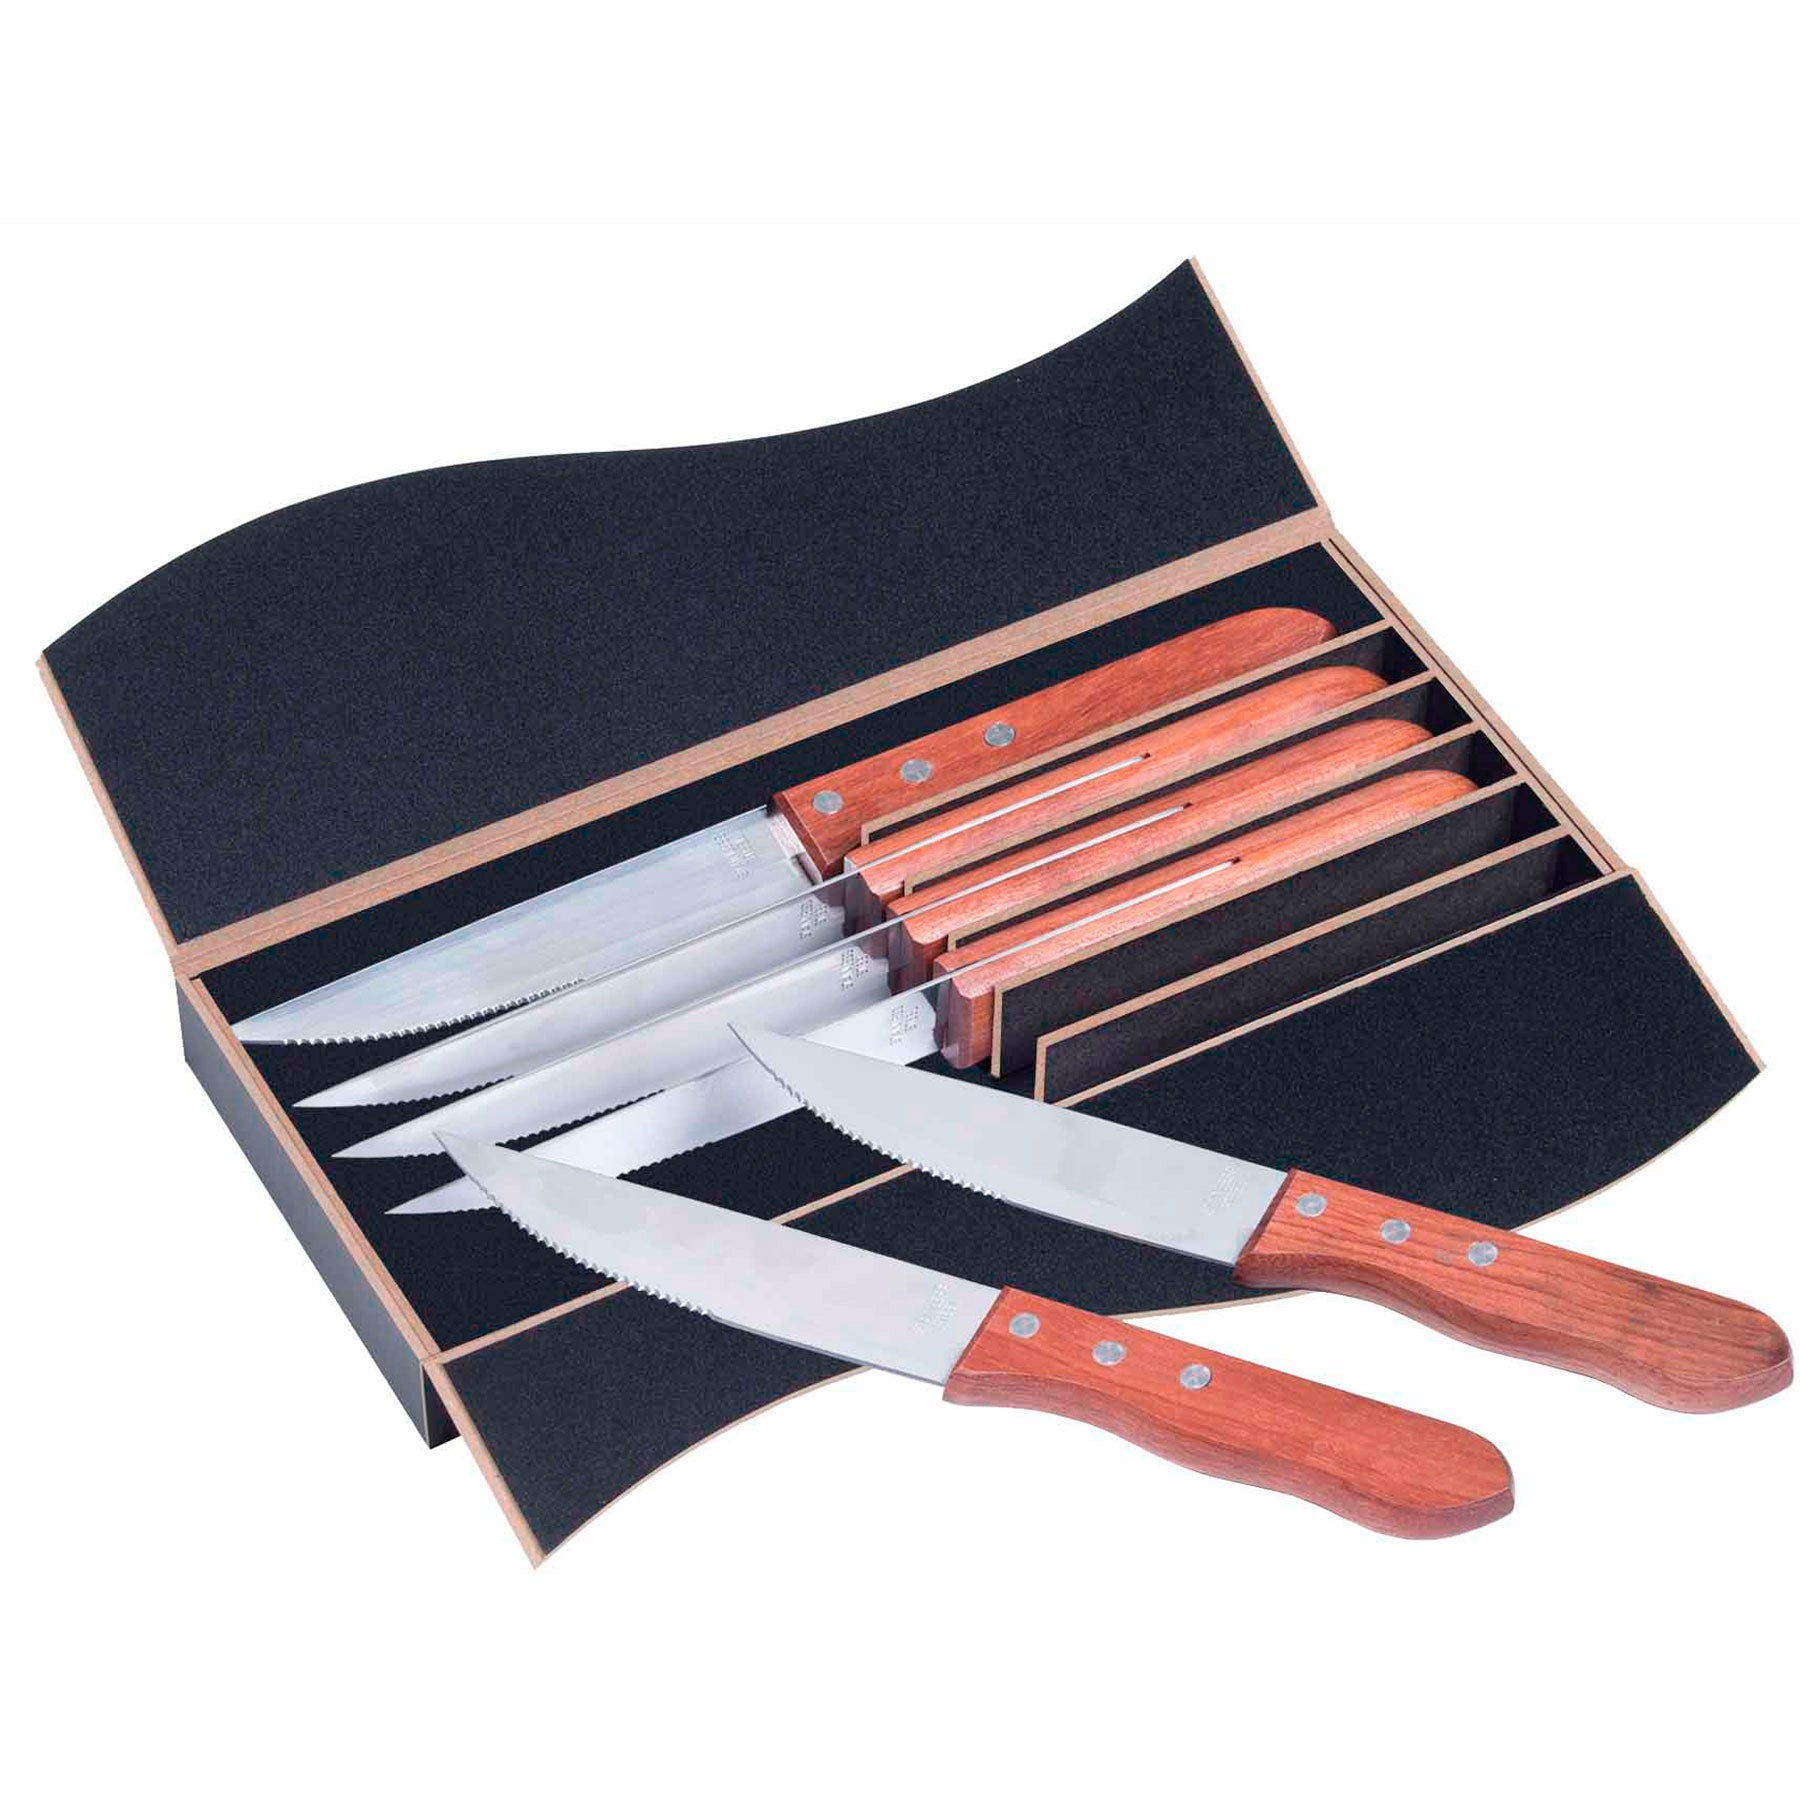 Set of 6 steak knives with stainless steel blades and rosewood timber handles displayed inside a moulded black box